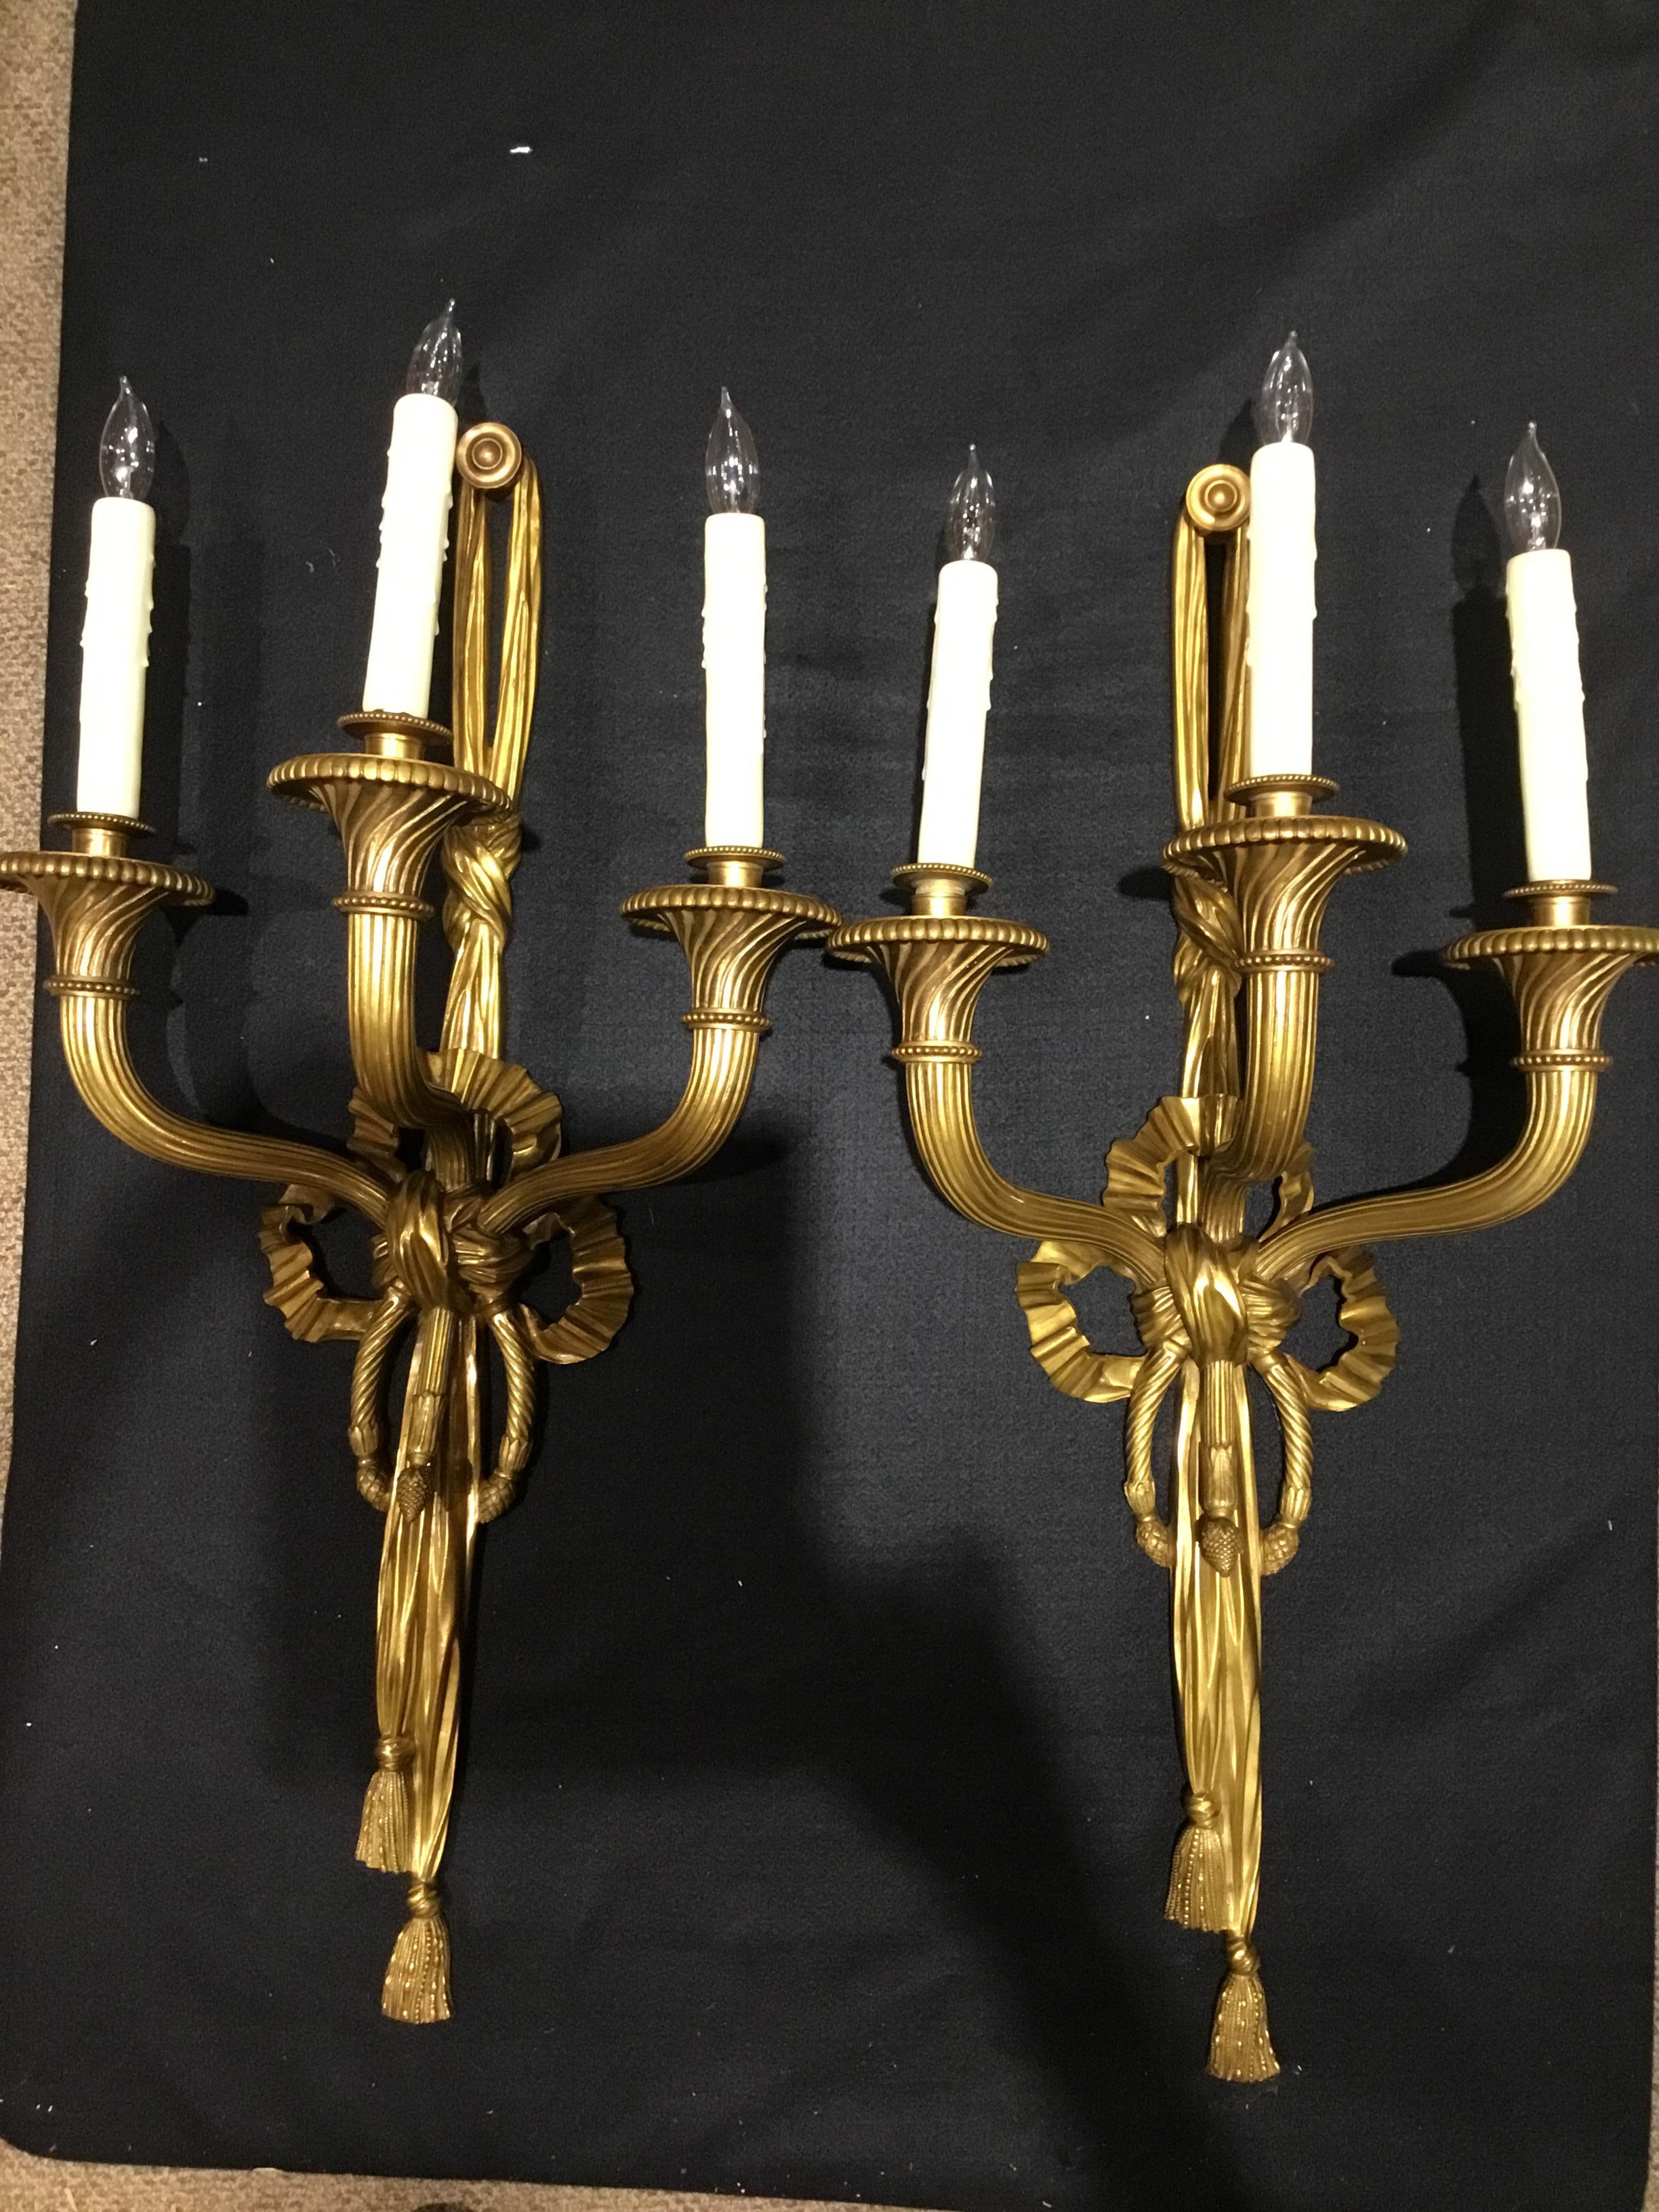 Pair of large and beautiful wall sconces that are wired with three lights,
Each having fluted arms extending from a ribbon form standard, ending
In bobéches with faux candle lights, 20th century.